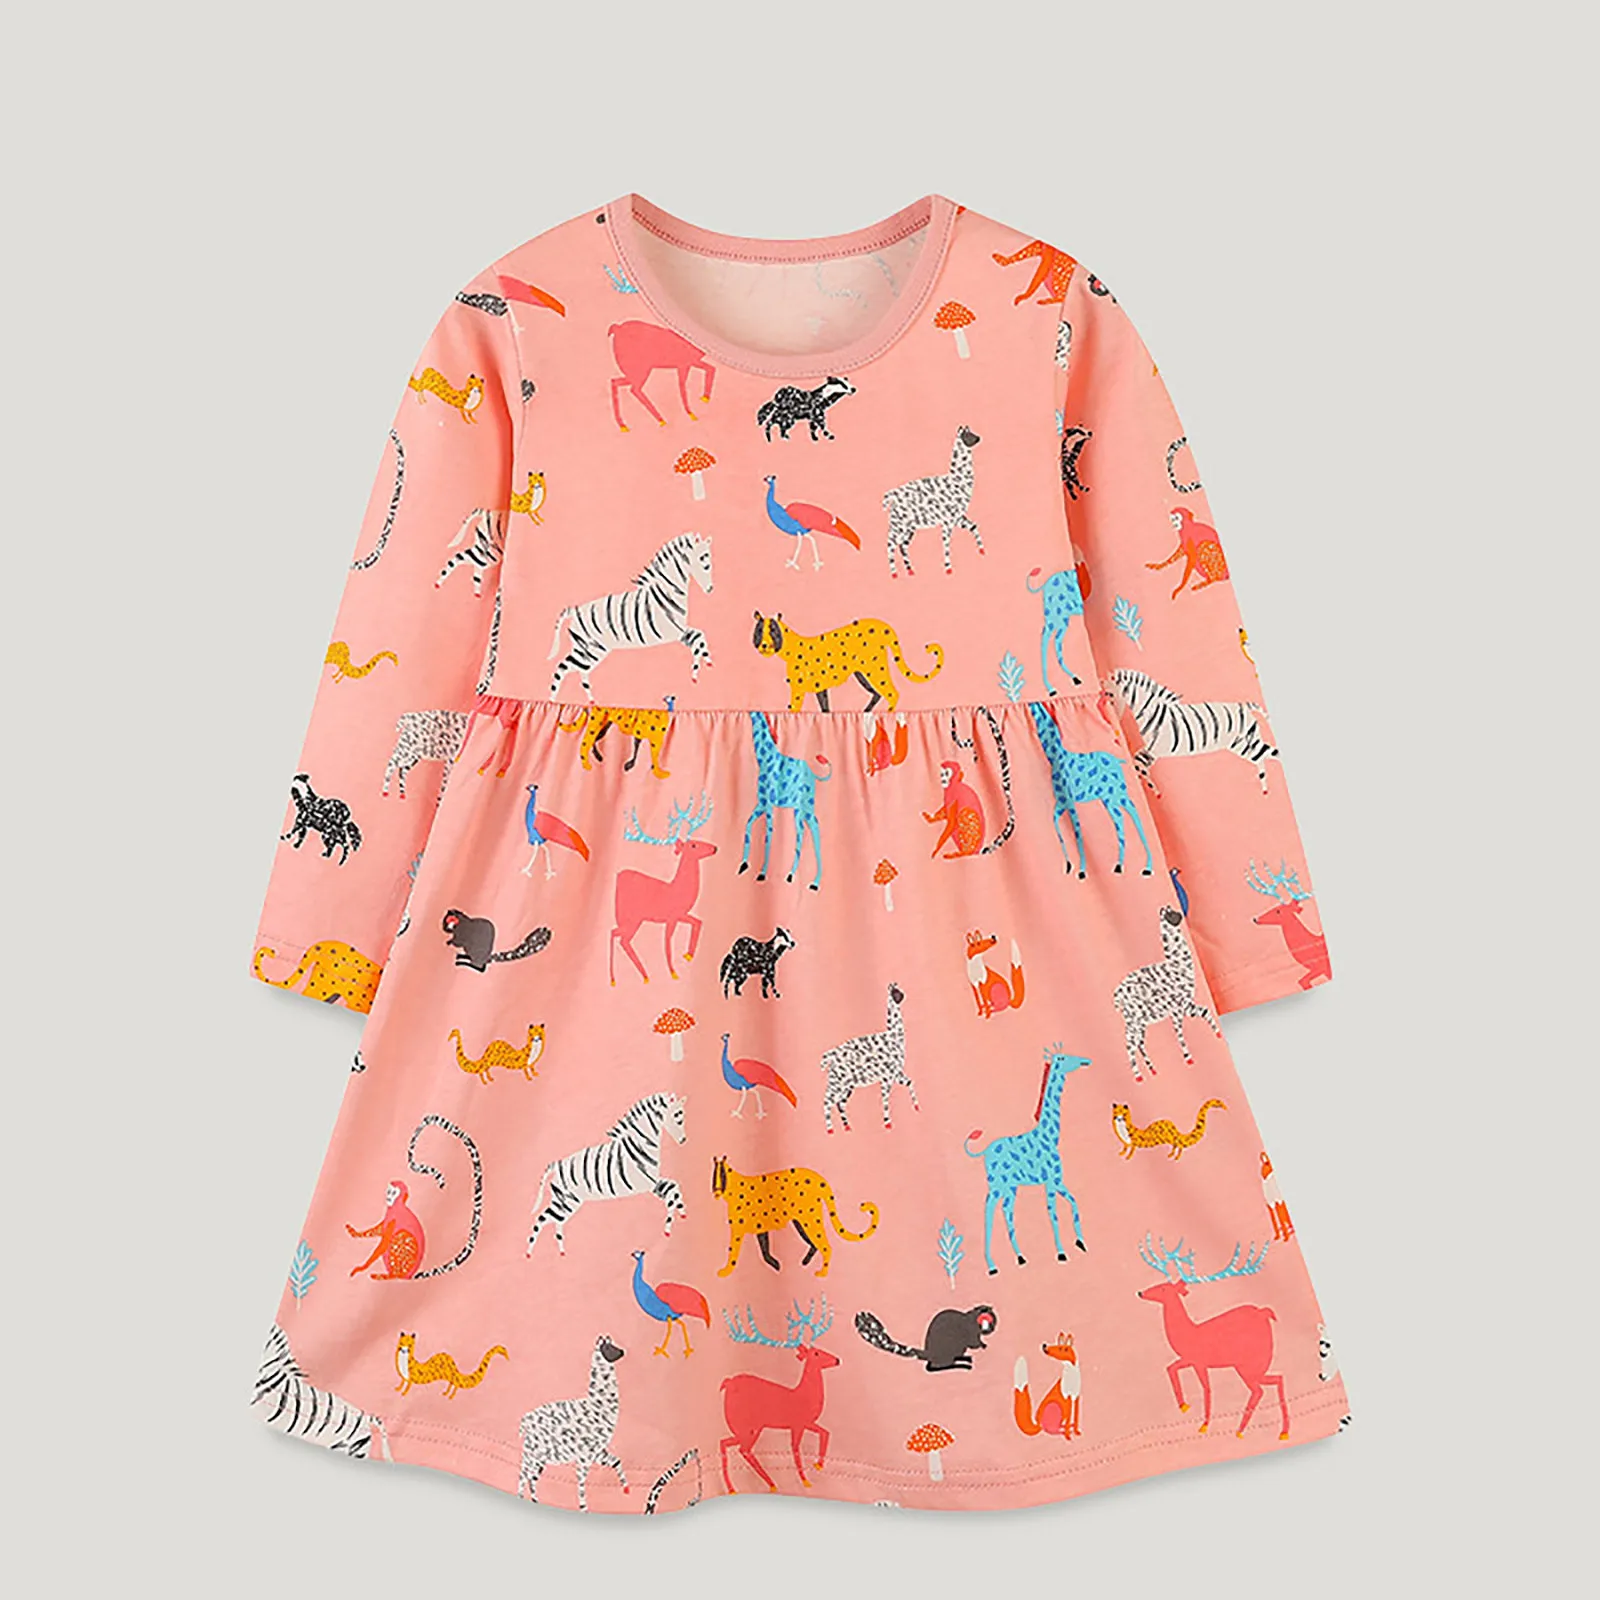 

Christmas Girls Dresses For 2-7T Cartoon Prints Pink Dress New Years Party Kids Girls Autumn Winter Long Sleeve Toddler Frocks